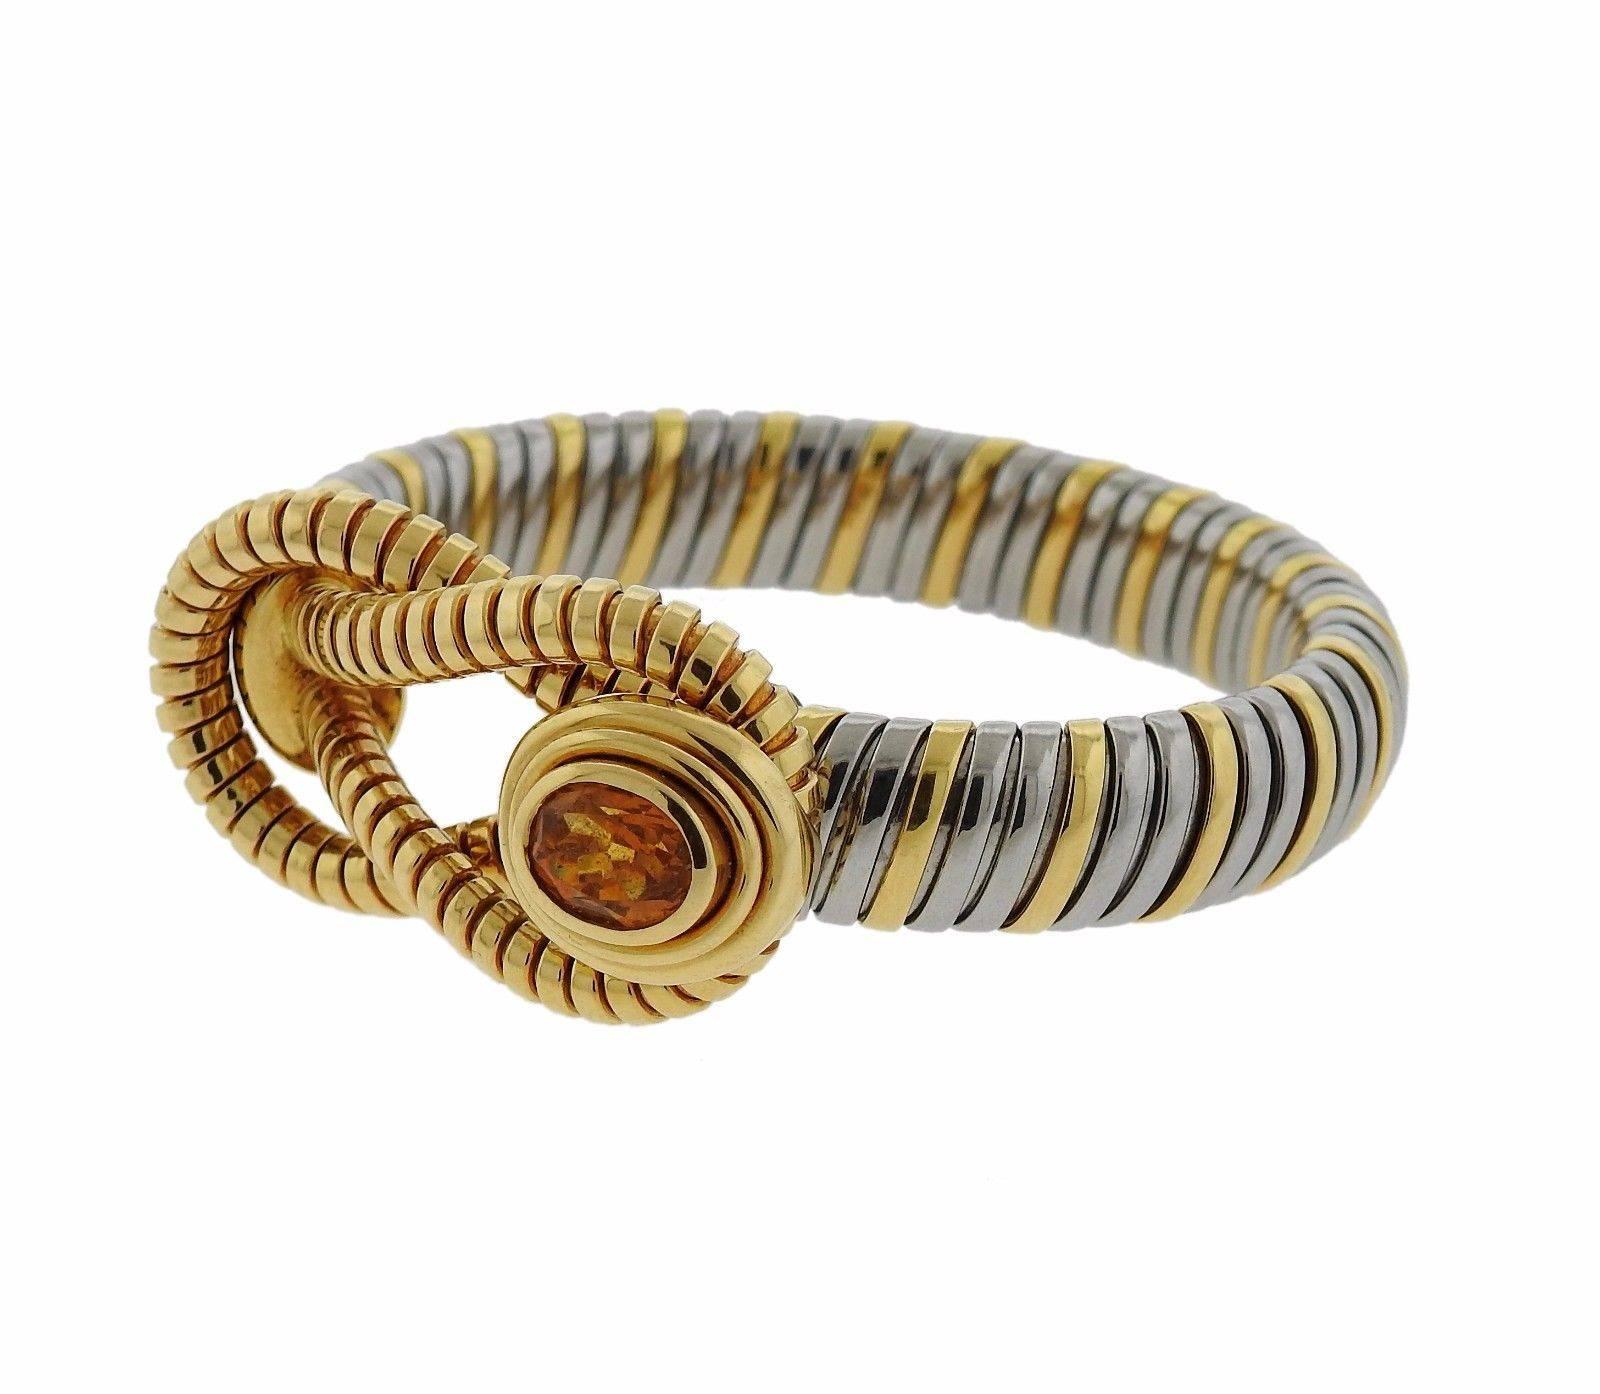 An 18k yellow gold and stainless steel bracelet set with a Citrine.  The bracelet is 8" long and weighs 37.1 grams.  Marked: Cartier, 103687.